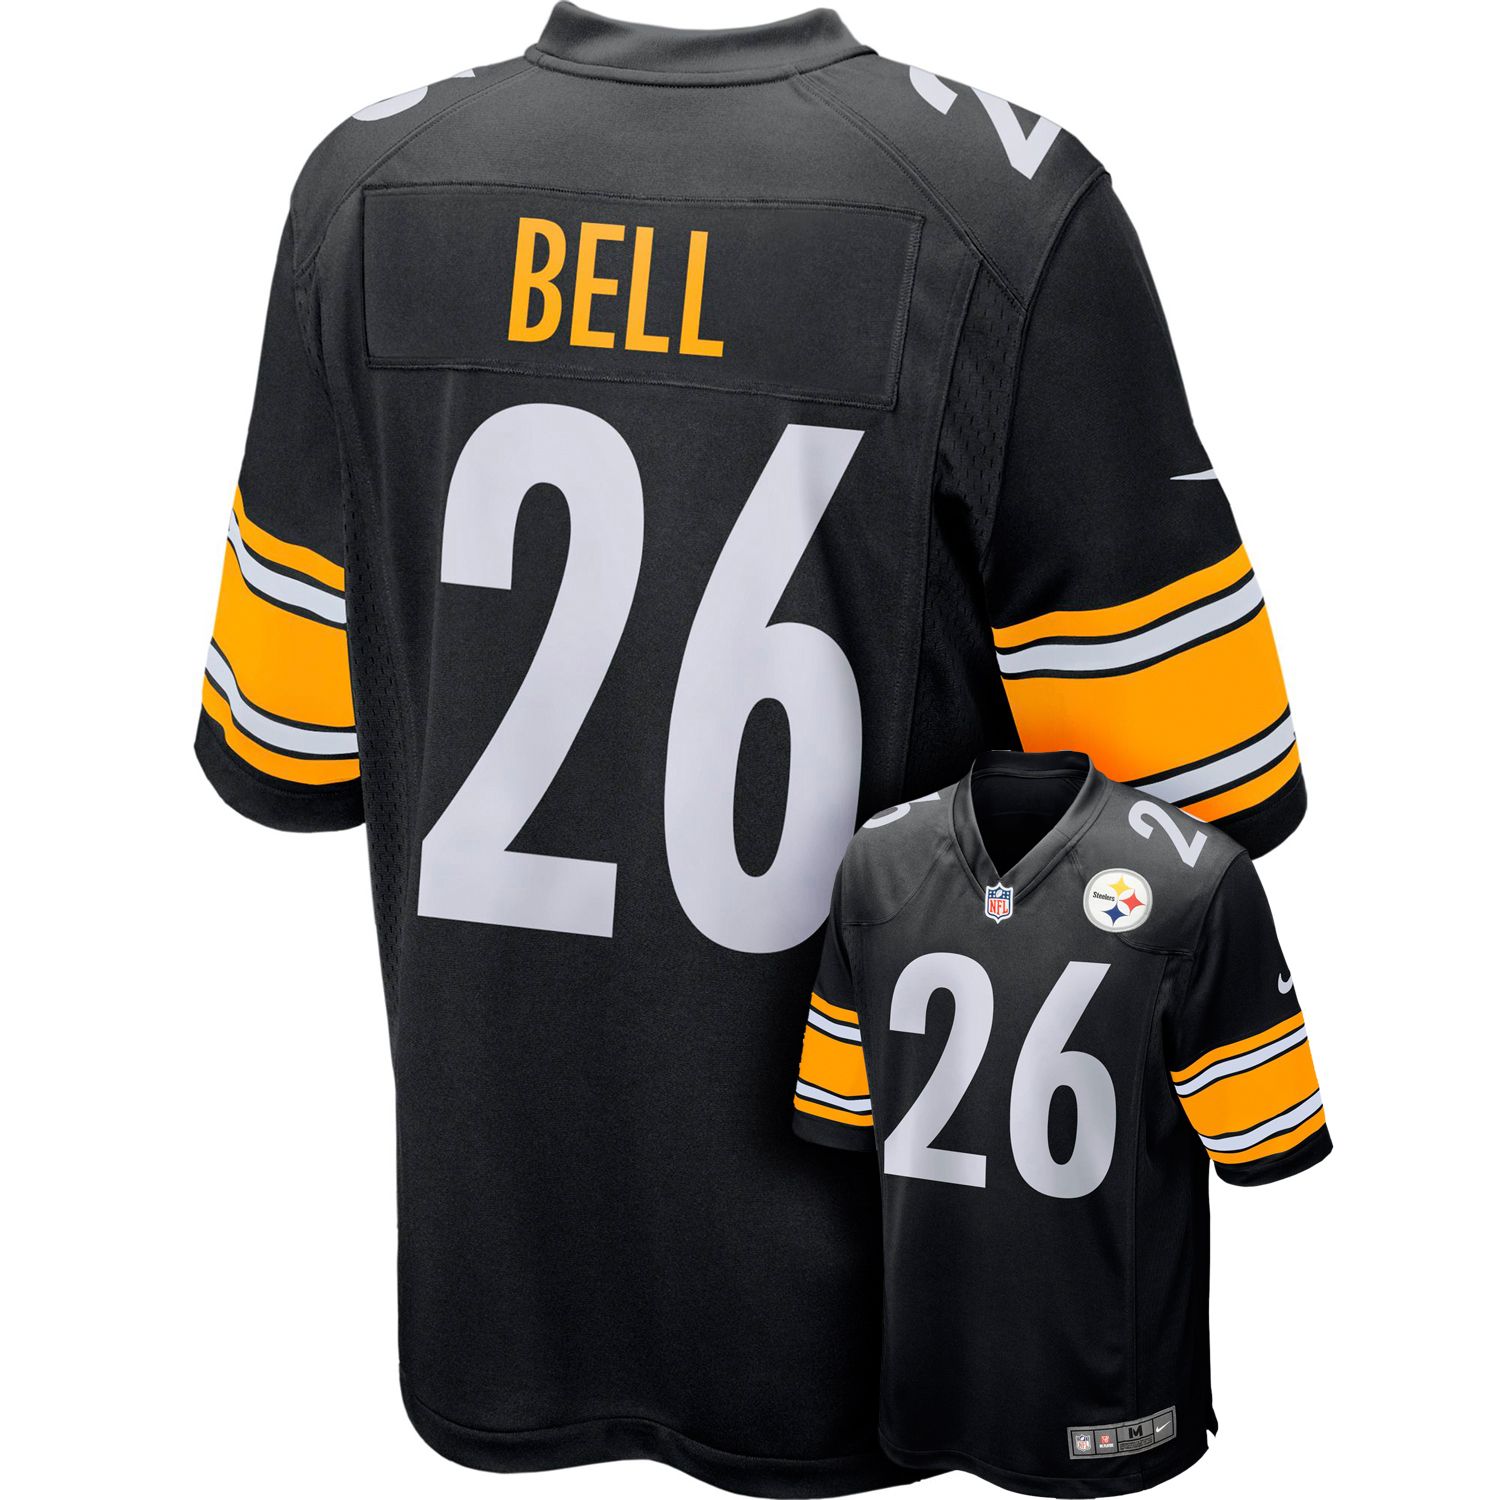 pittsburgh steelers bell jersey